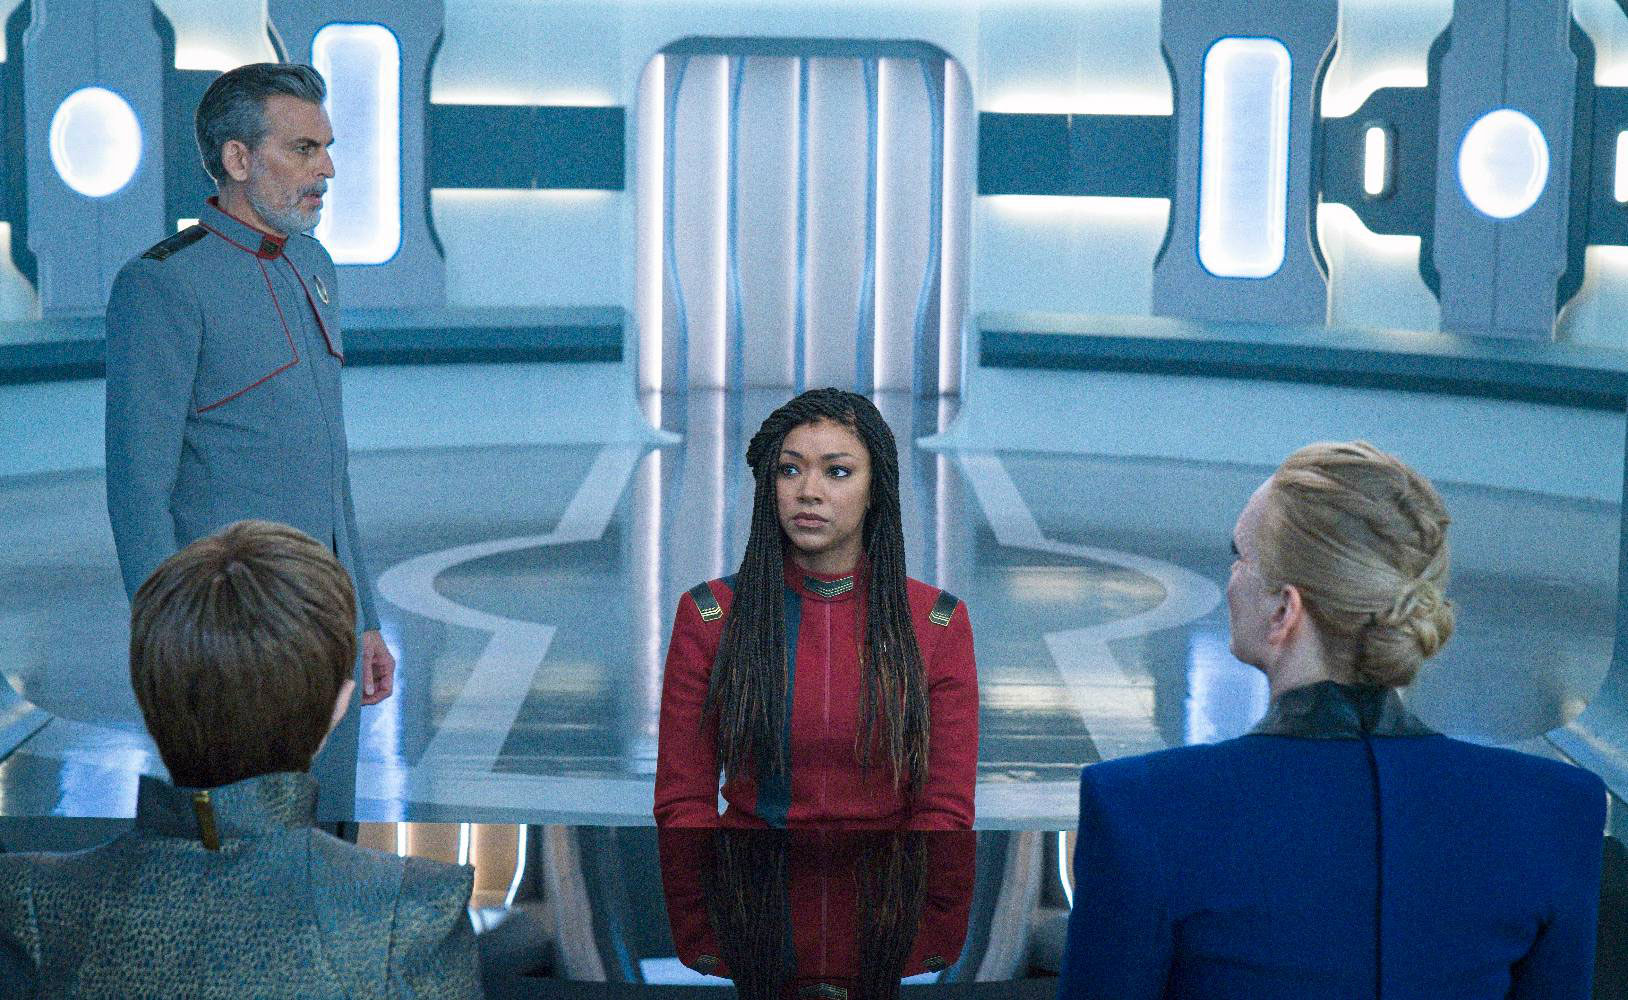 Photo from Star Trek: Discovery Episode 403 “Choose to Live”